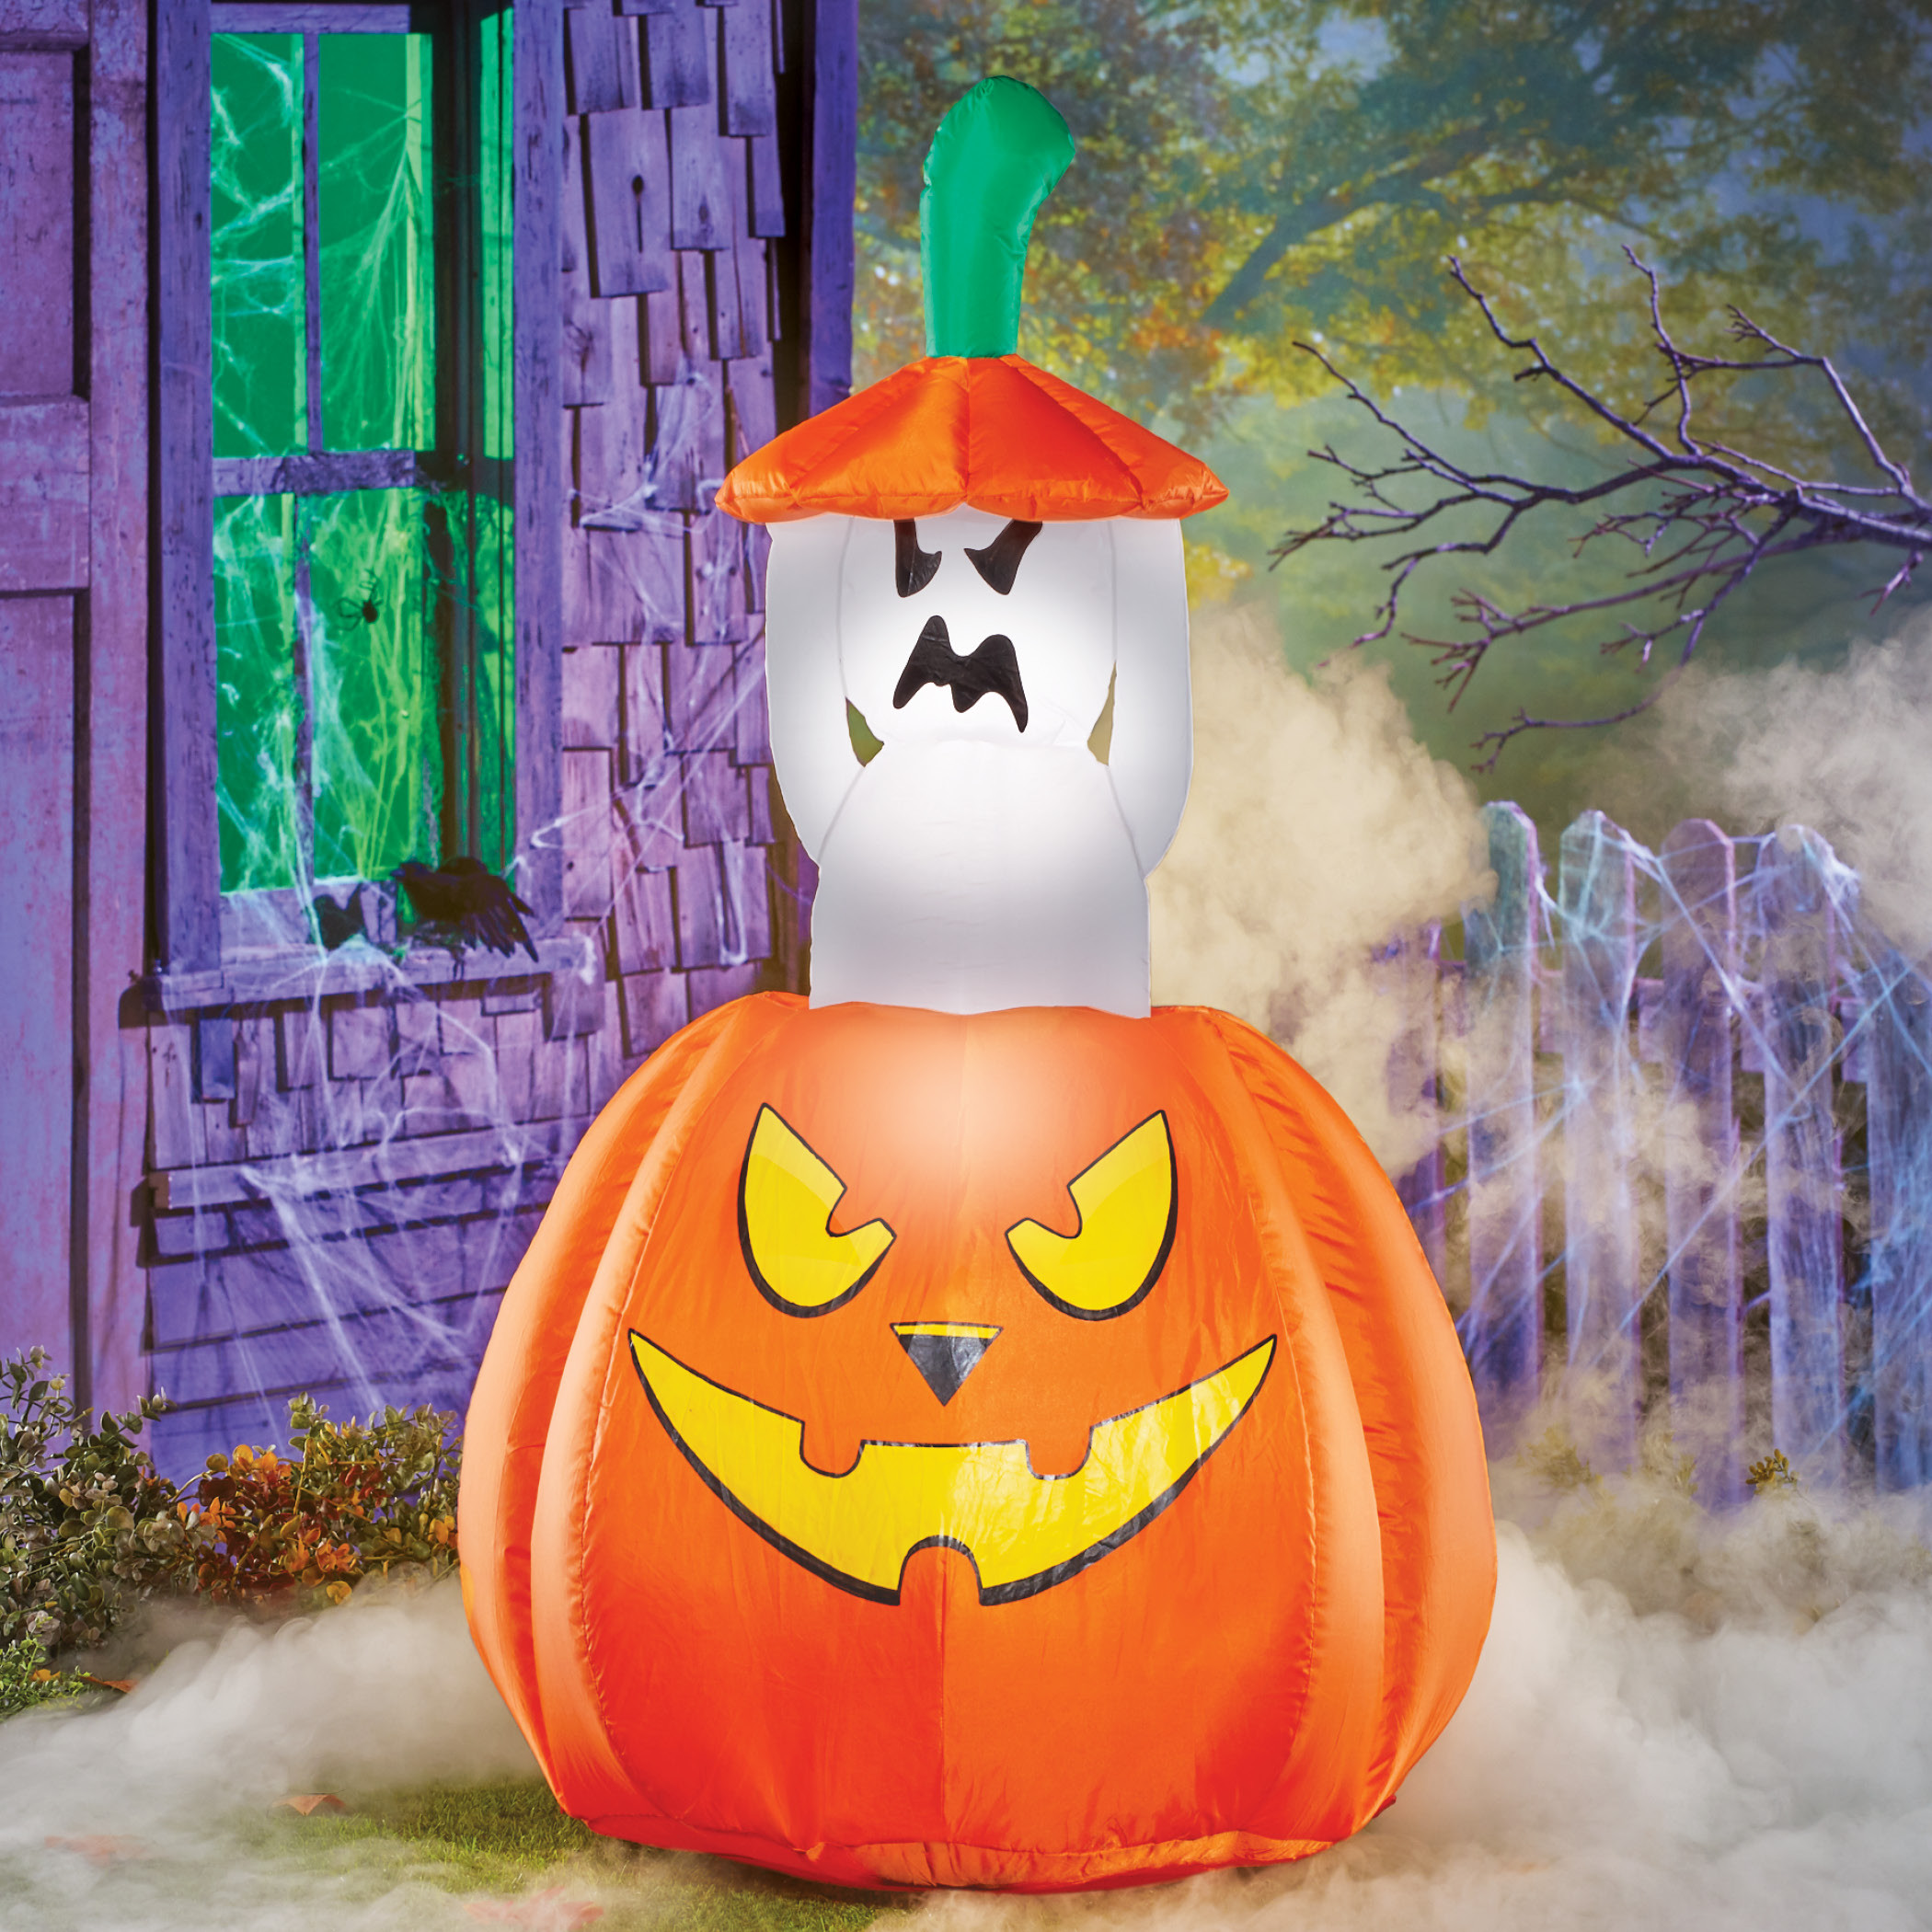 Outdoor Animated Halloween Decorations
 Collections Etc 4 Foot Inflatable Animated Ghost Halloween